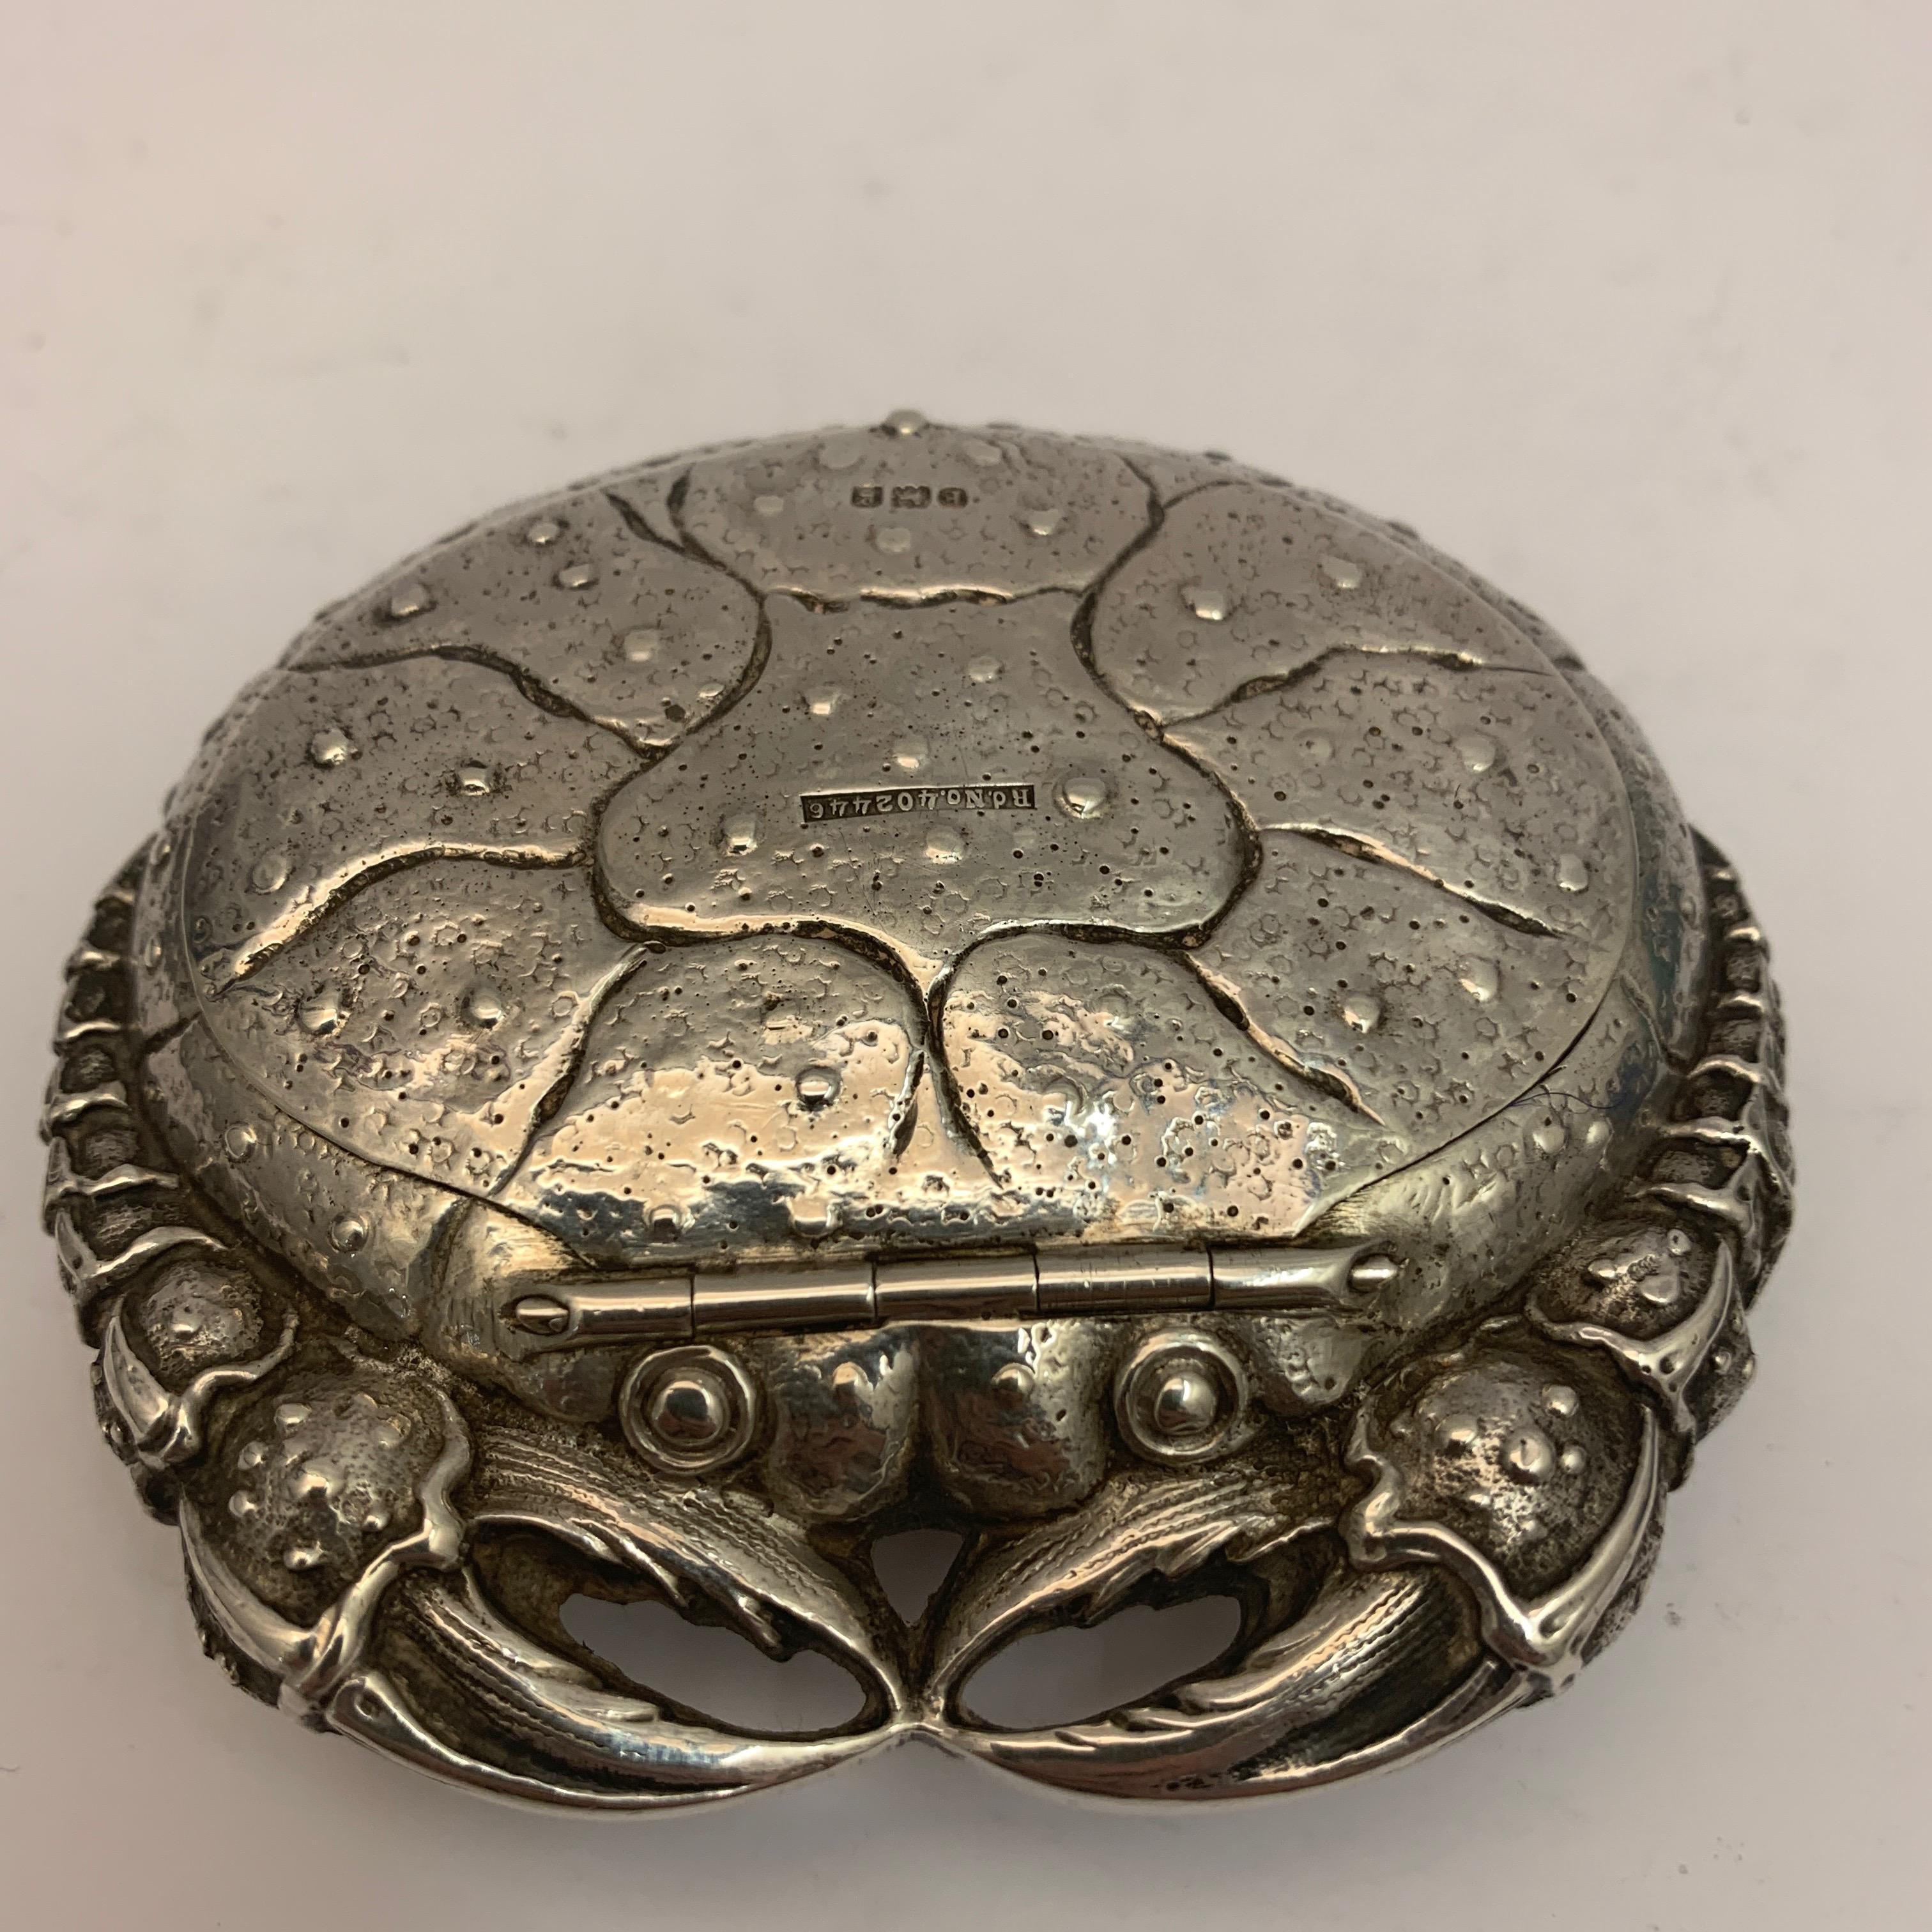 A charming silver crab snuff box with intricate decoration and gilt interior. The snuff box is of foreign origin but was recorded as being imported into London in 1902.